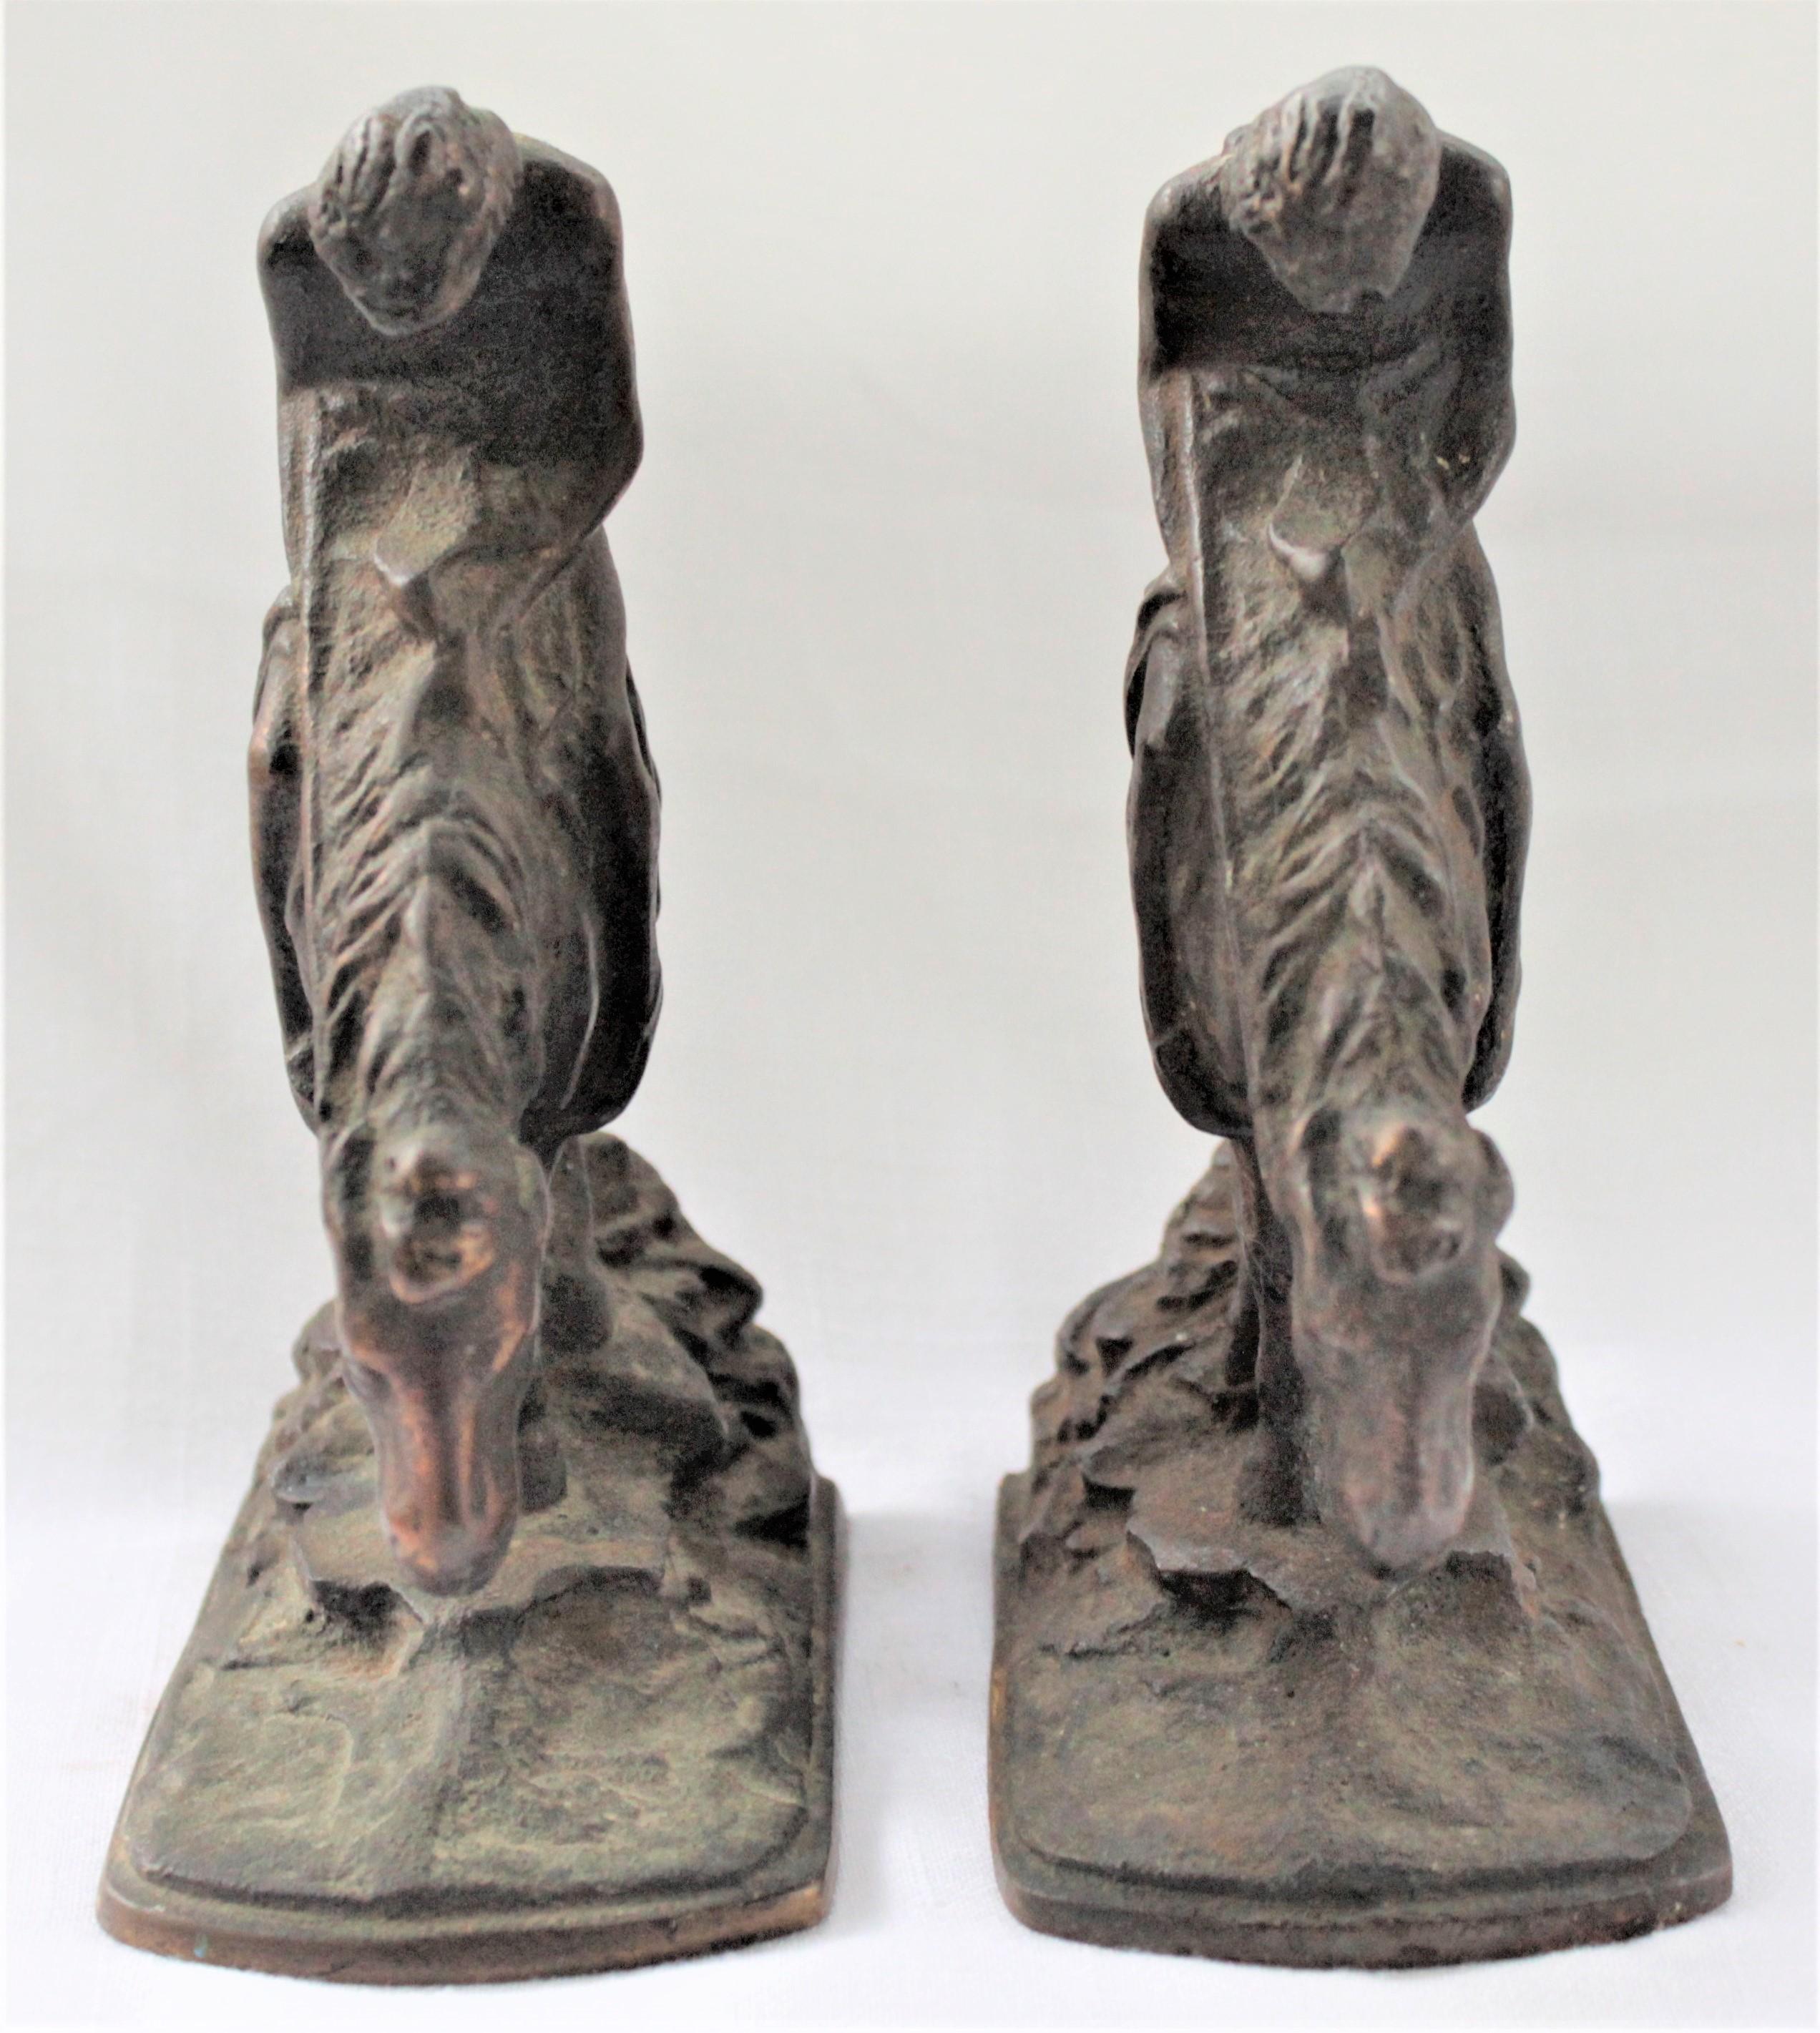 American Colonial Pair of Art Deco Cast Bronzed Metal Western Cowboy Themed Sculptural Bookends For Sale